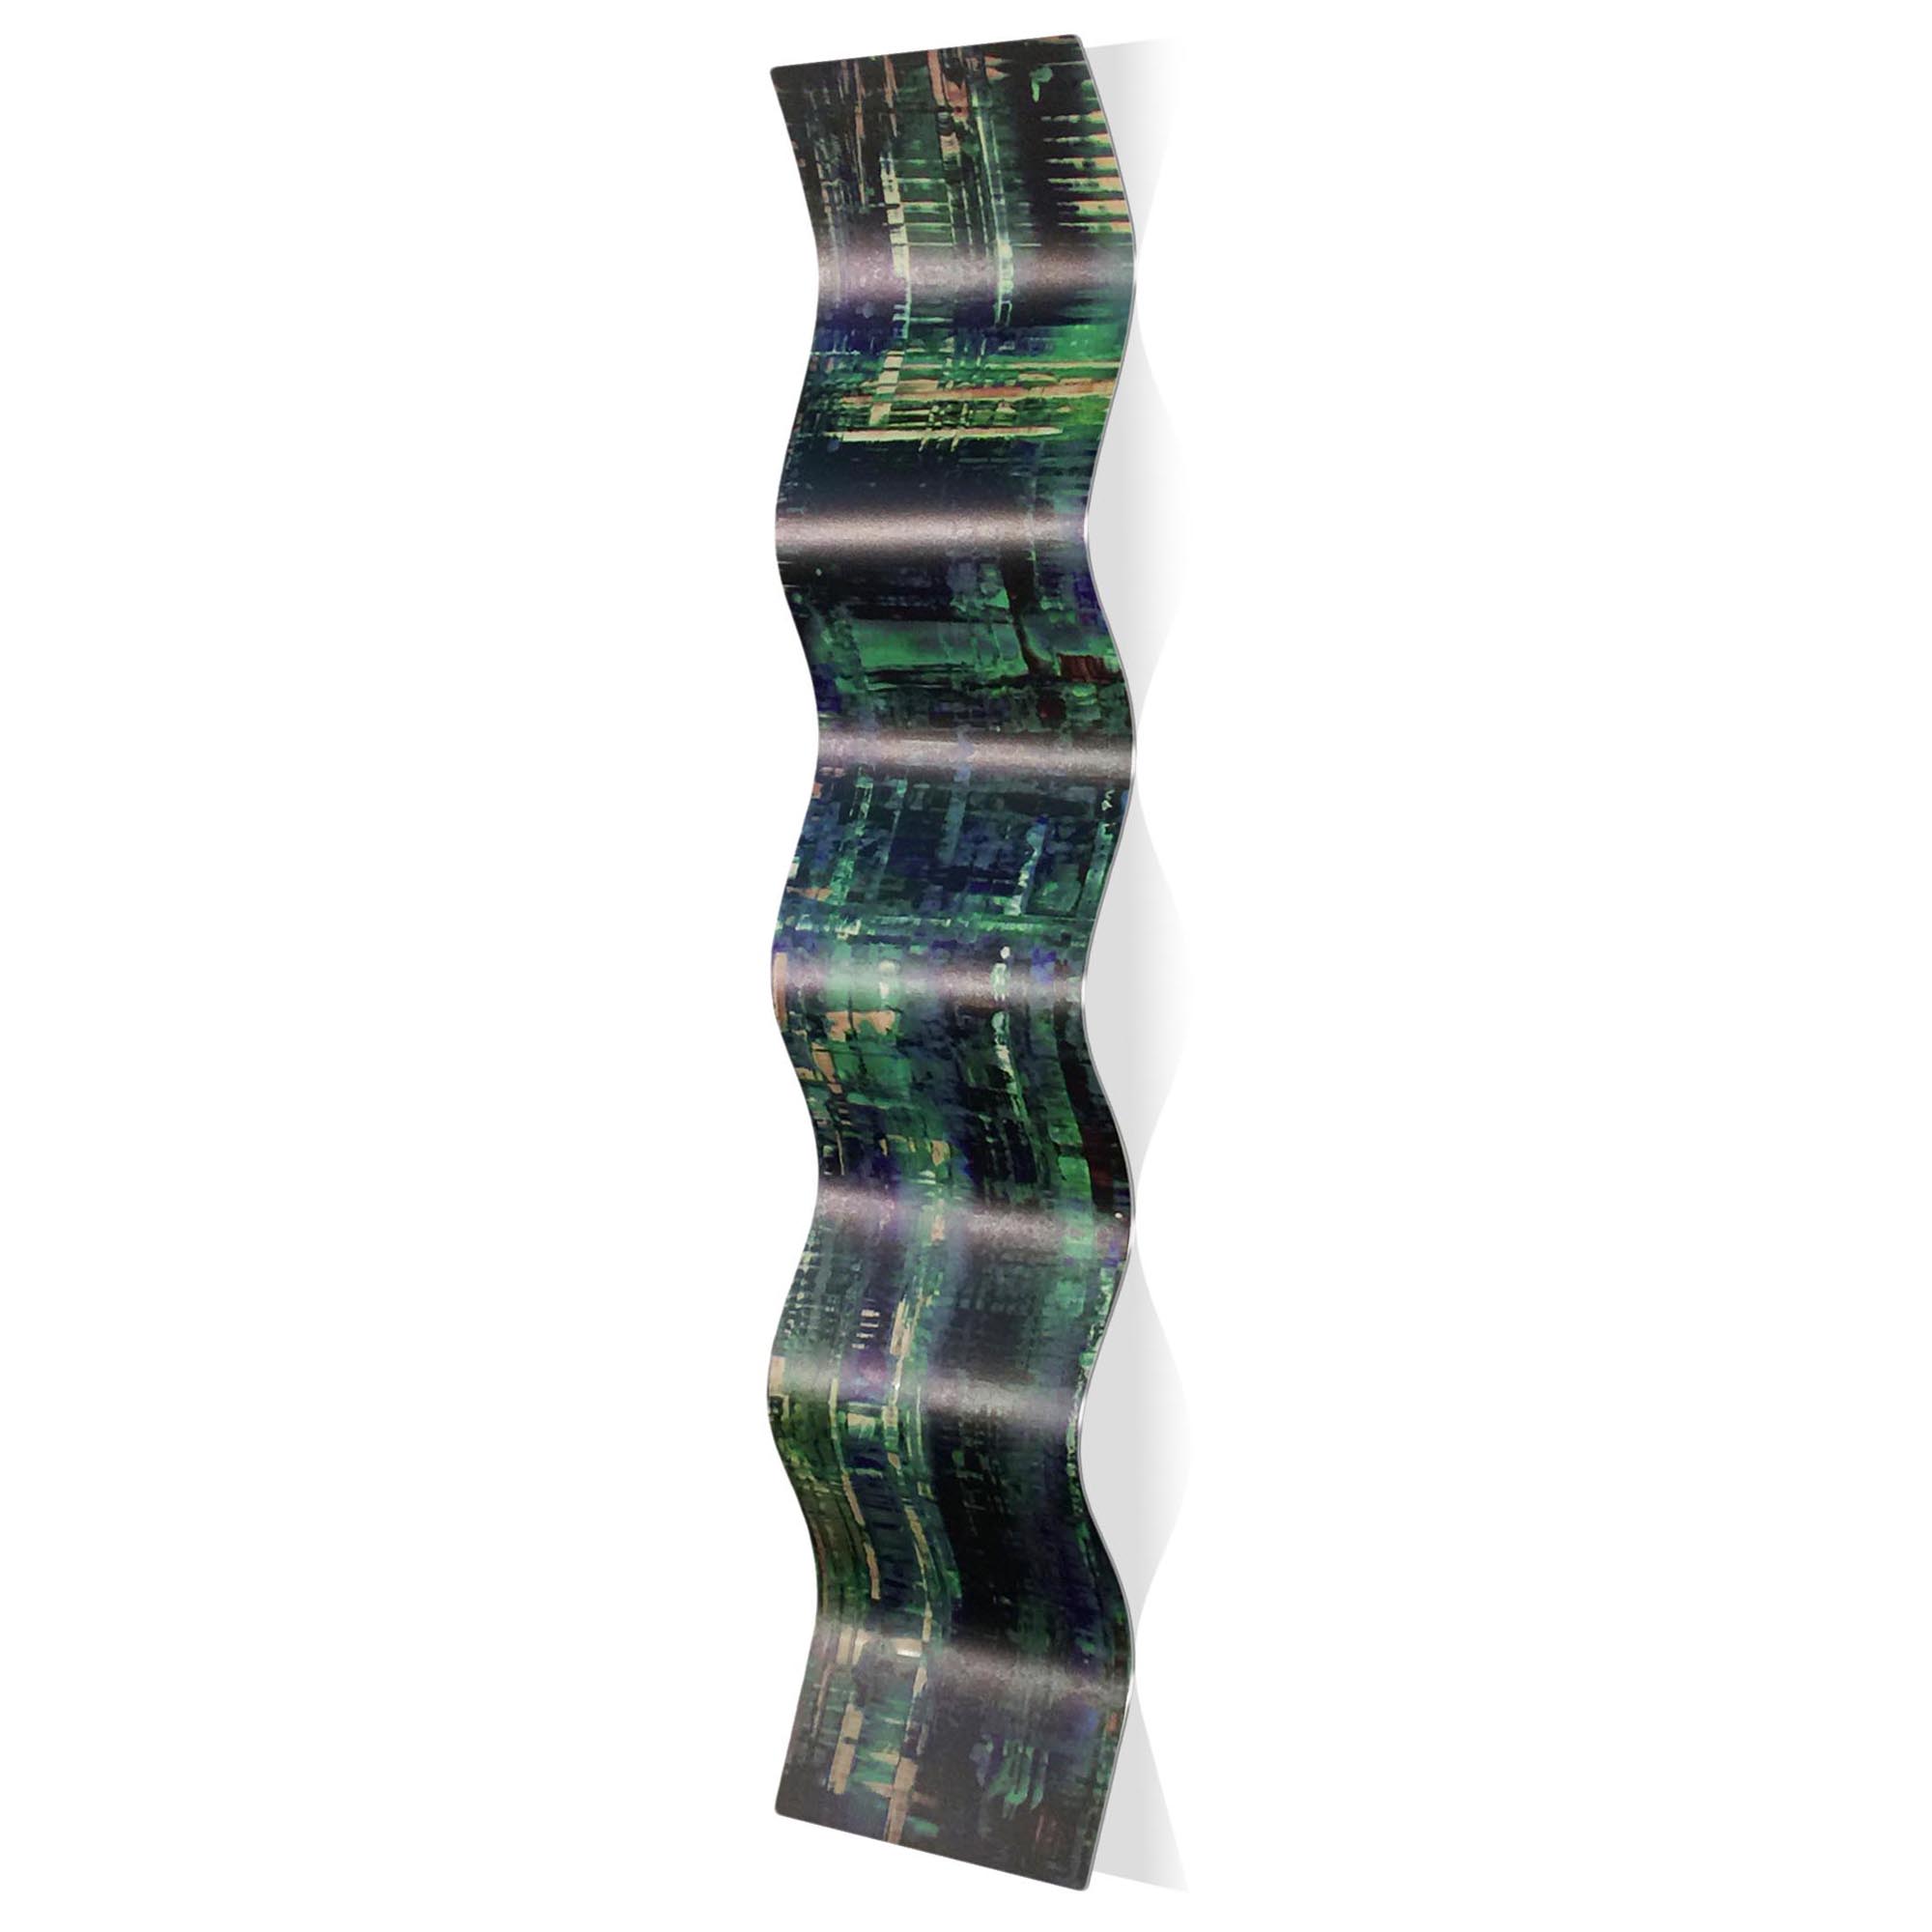 Aporia Blue Wave 9.5x44in. Metal Eclectic Decor